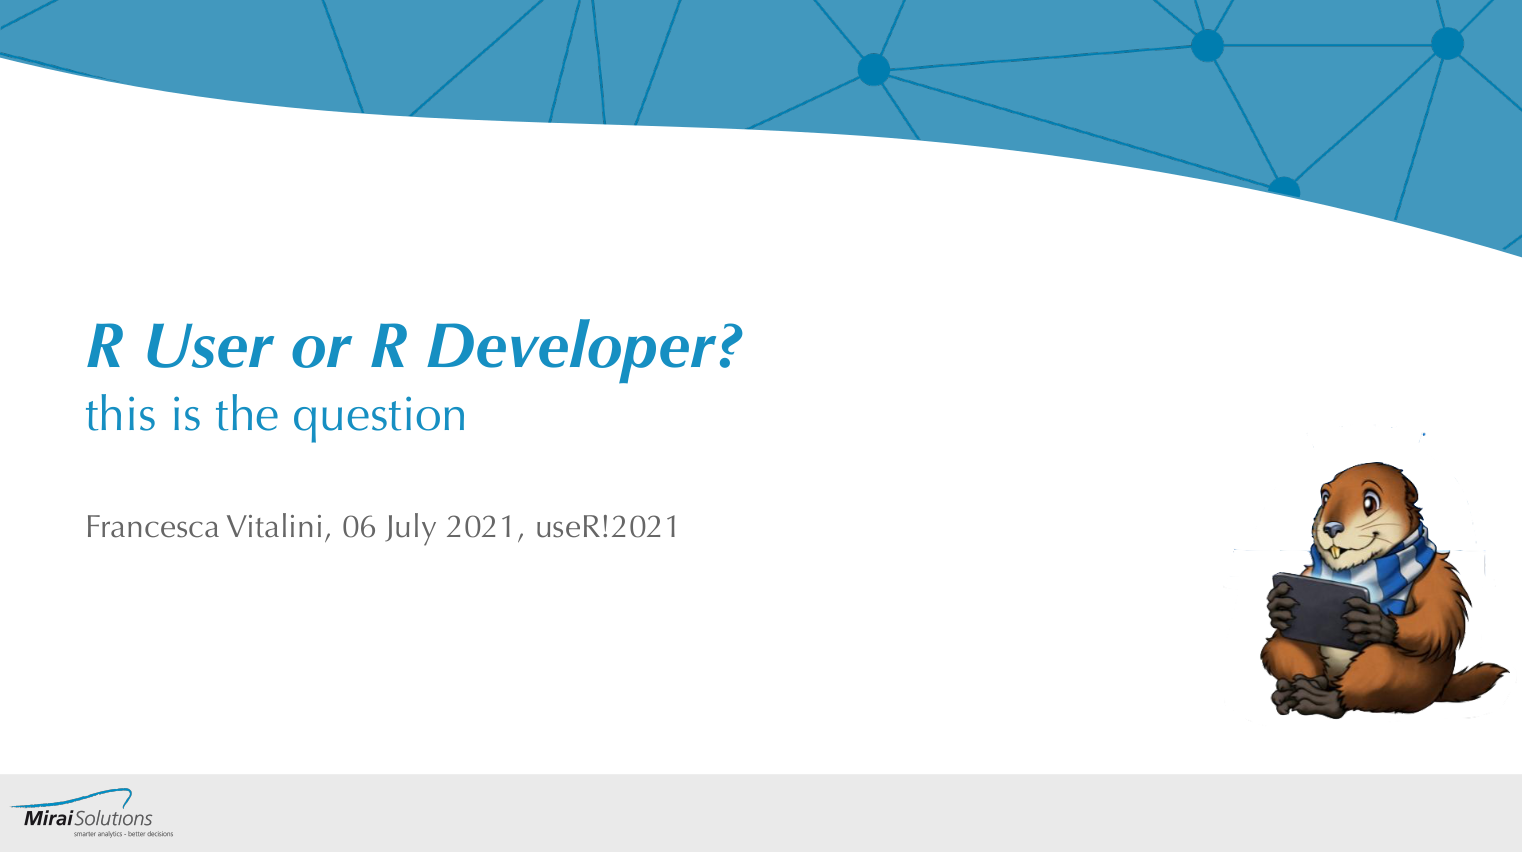 R User or R Developer? This is the question